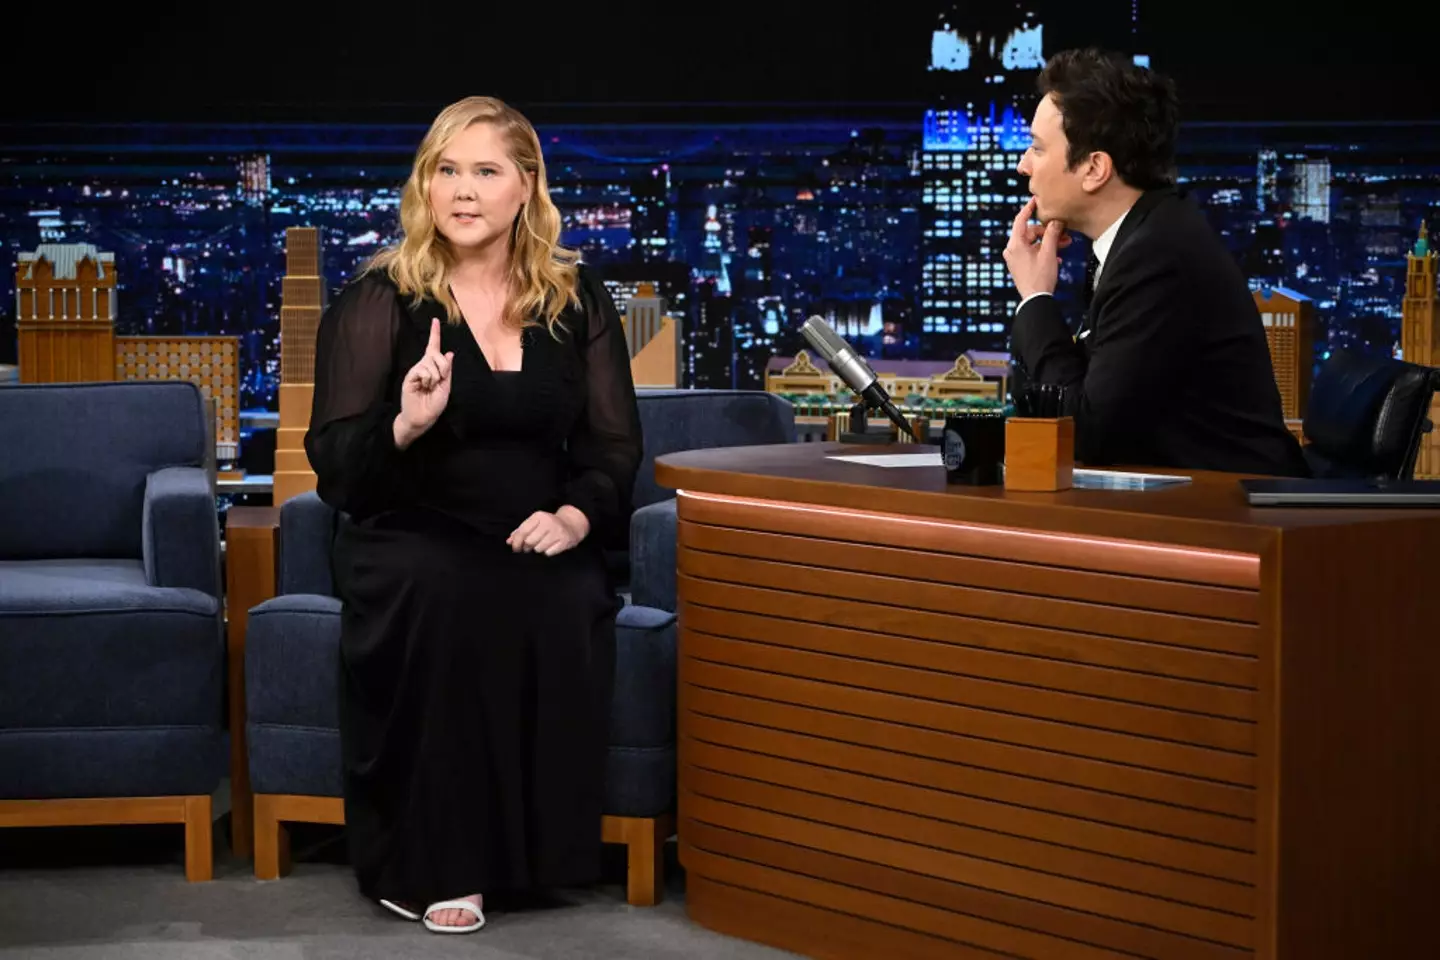 Fans expressed concern over Amy Schumer's appearance during her recent appearance on The Tonight Show Starring Jimmy Fallon.